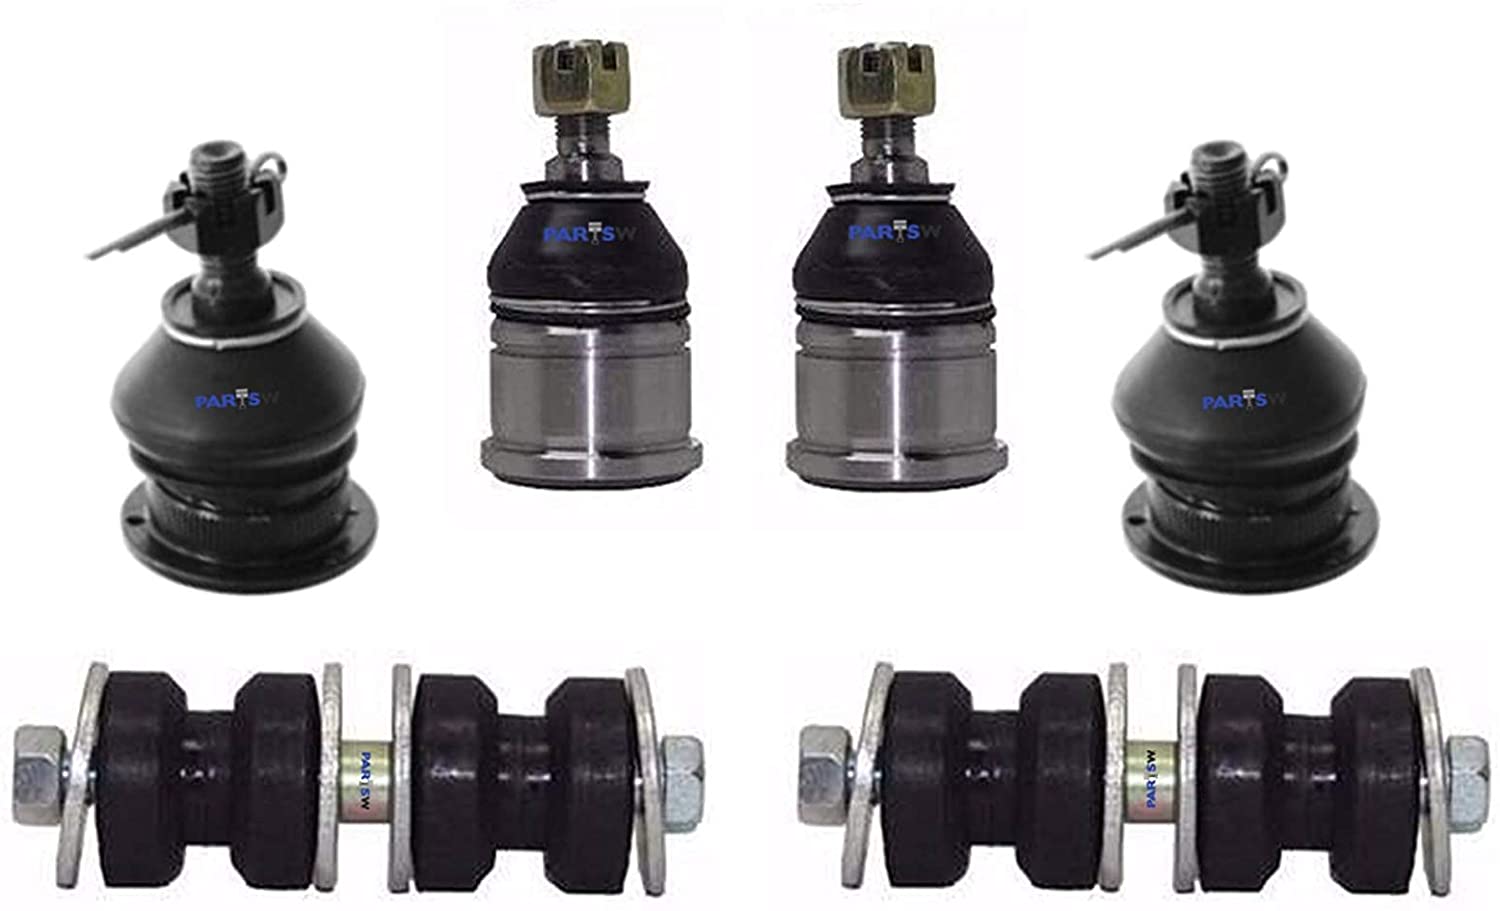 PartsW 6 Pc Front Suspension Kit for Honda Accord & Isuzu Oasis/Sway Bar End Link, Upper & Lower Ball Joints